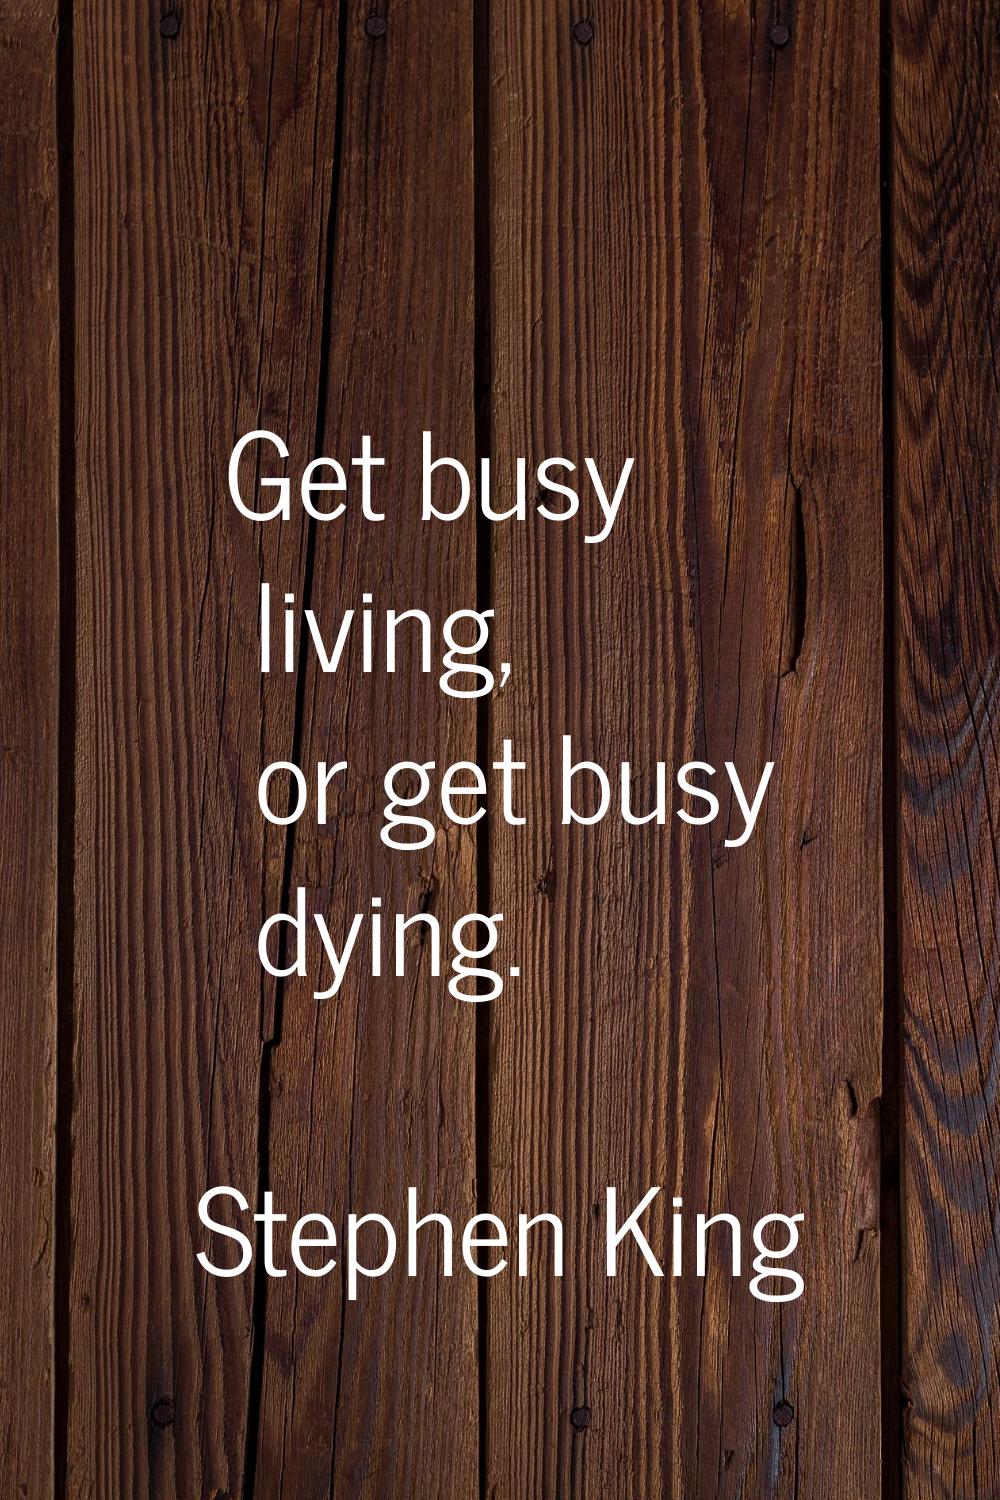 Get busy living, or get busy dying.